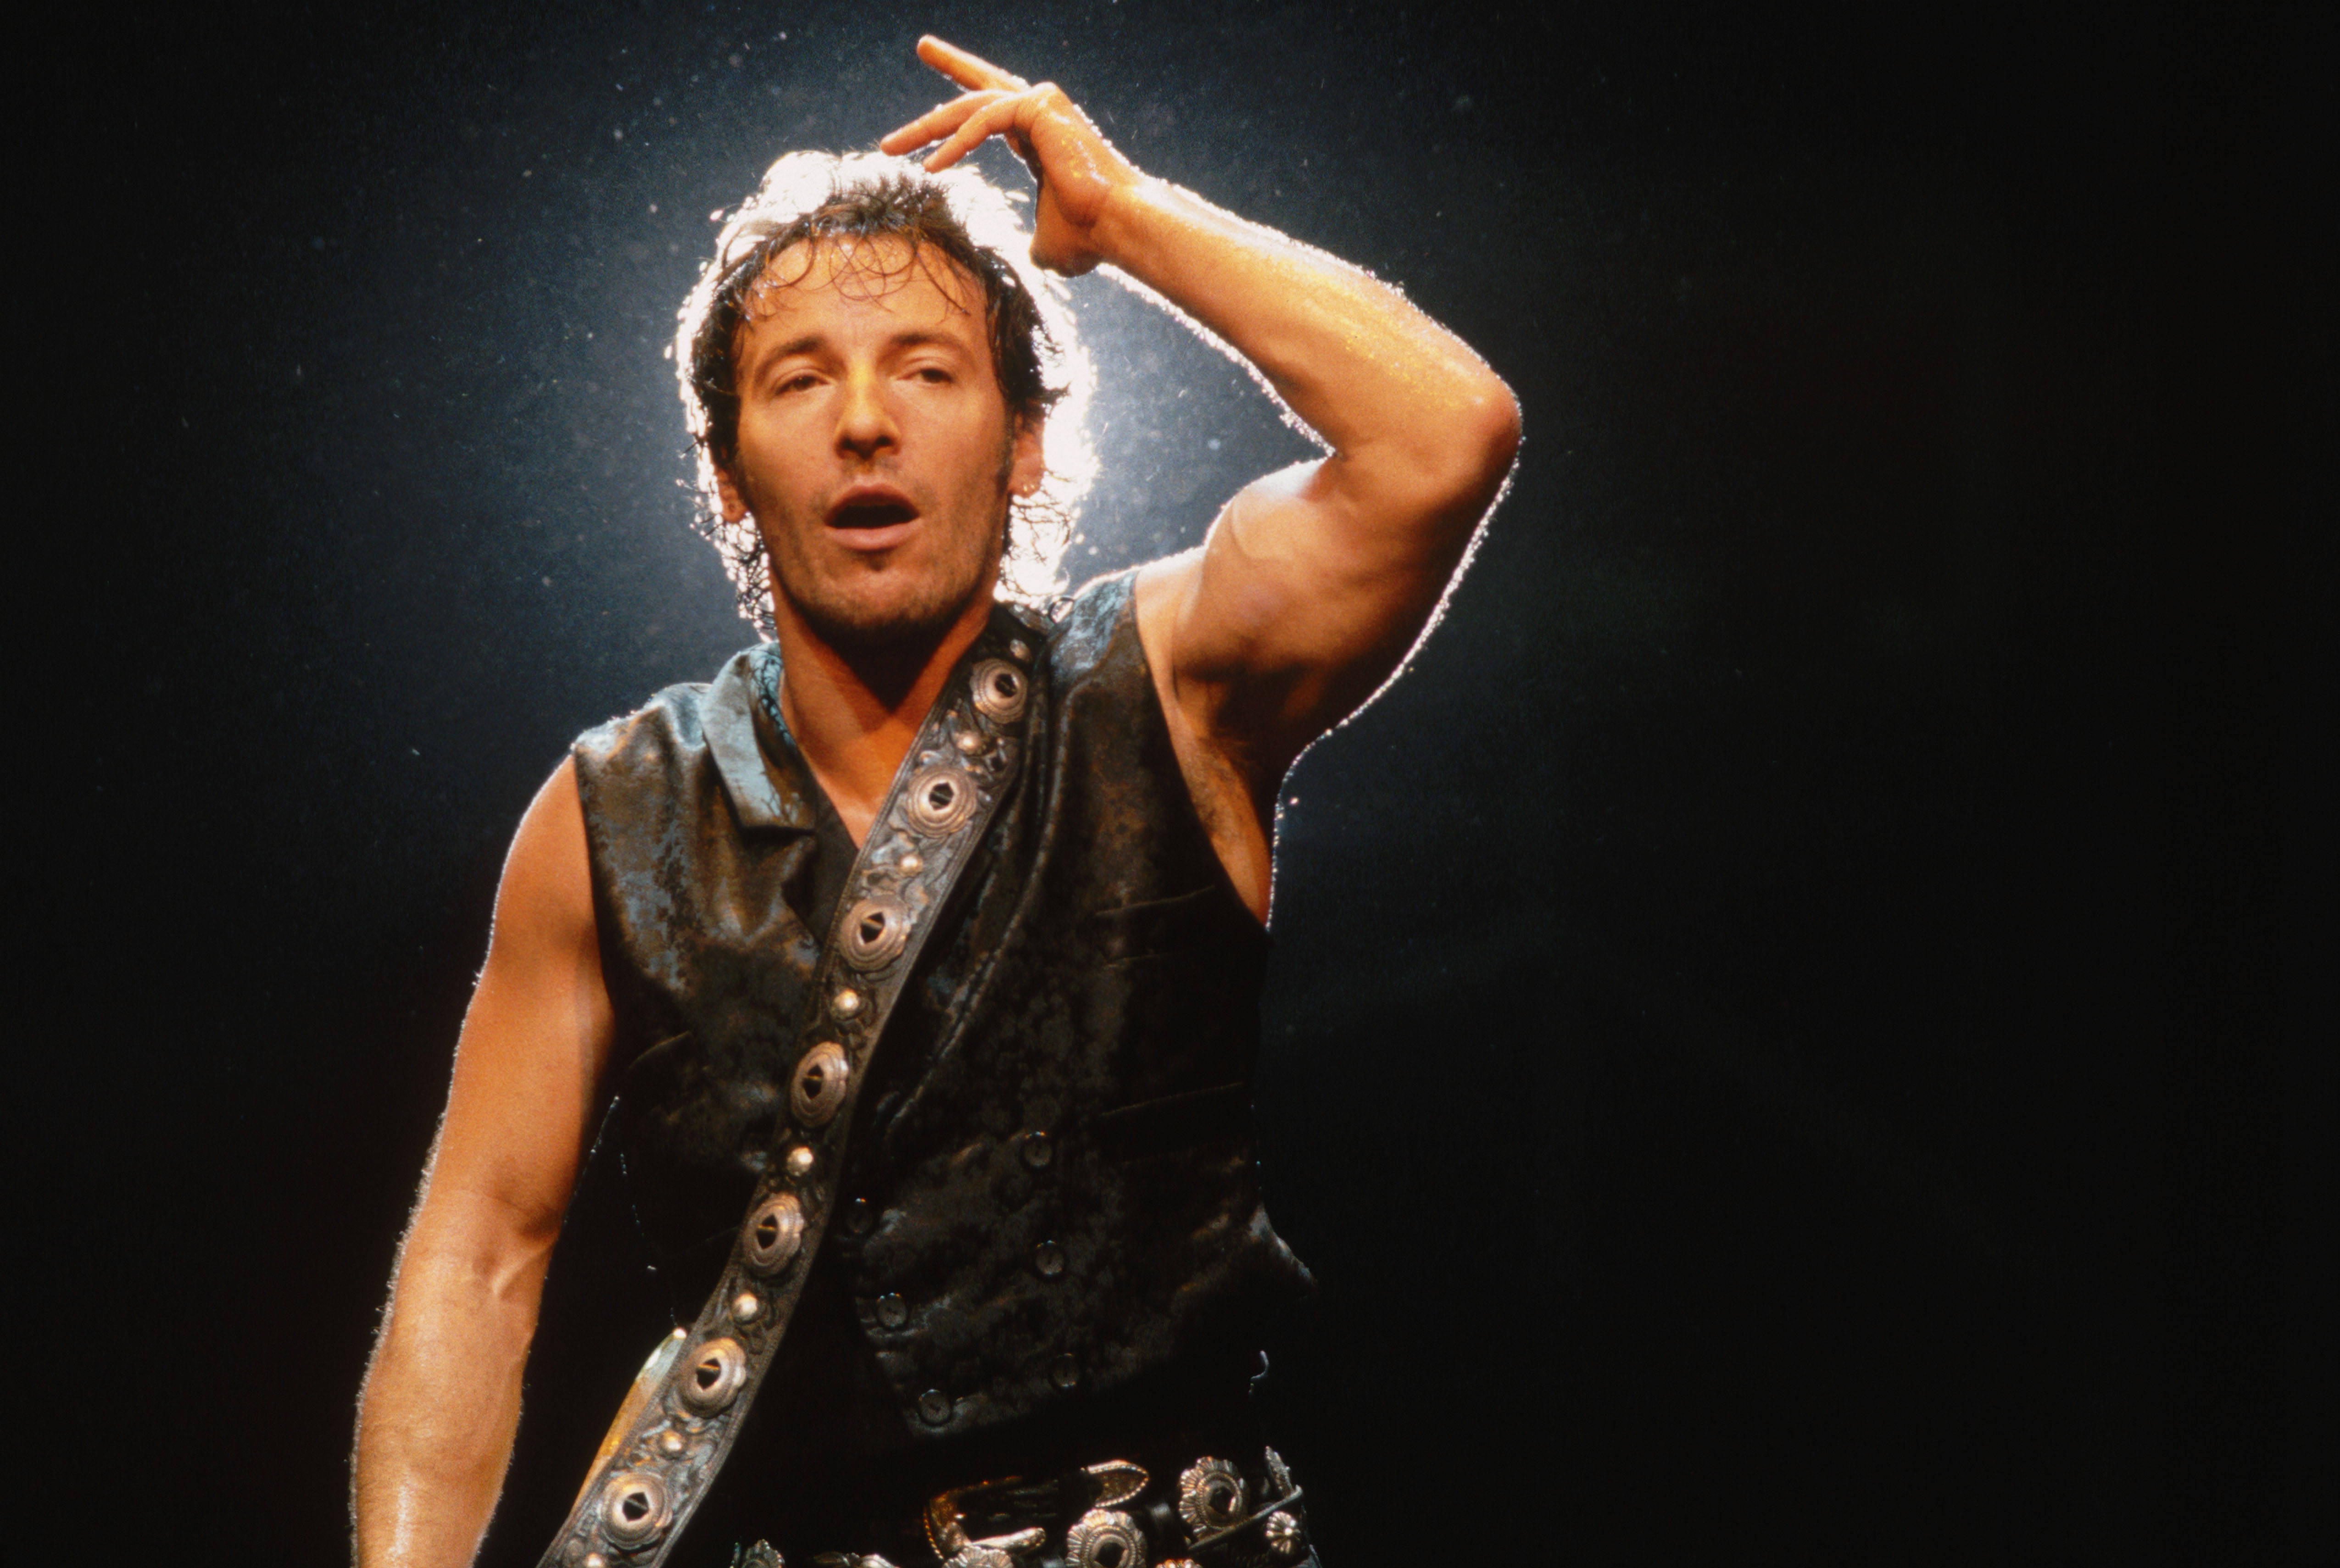 High Quality Bruce Springsteen Wallpaper Full HD Pictures